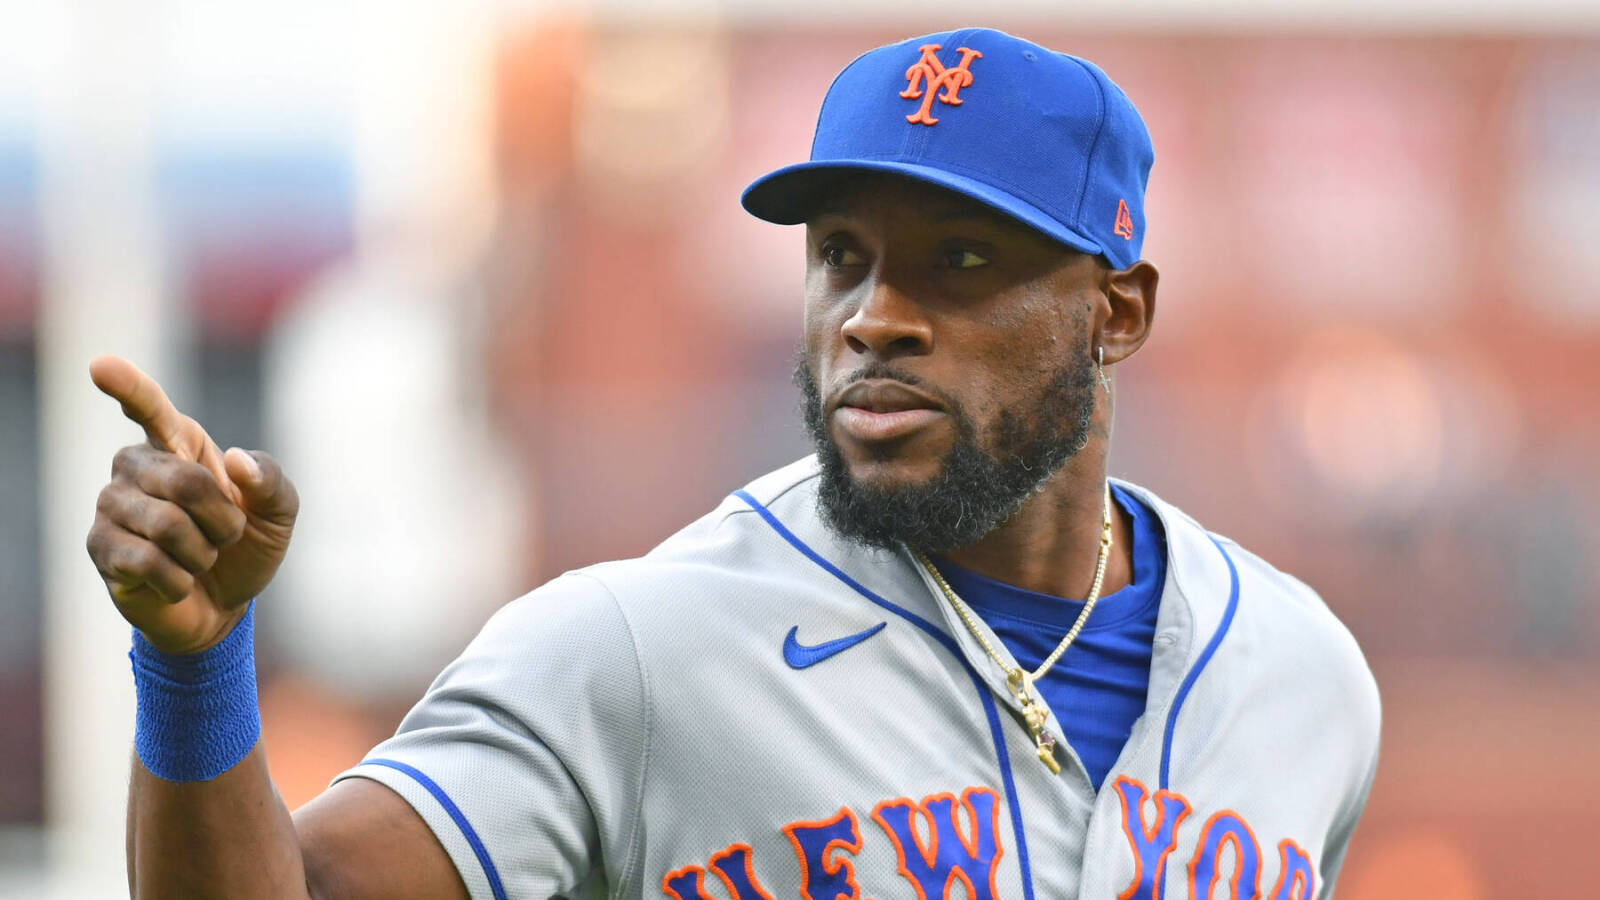 Report: Stint on IL 'a likelihood' for Mets' Starling Marte